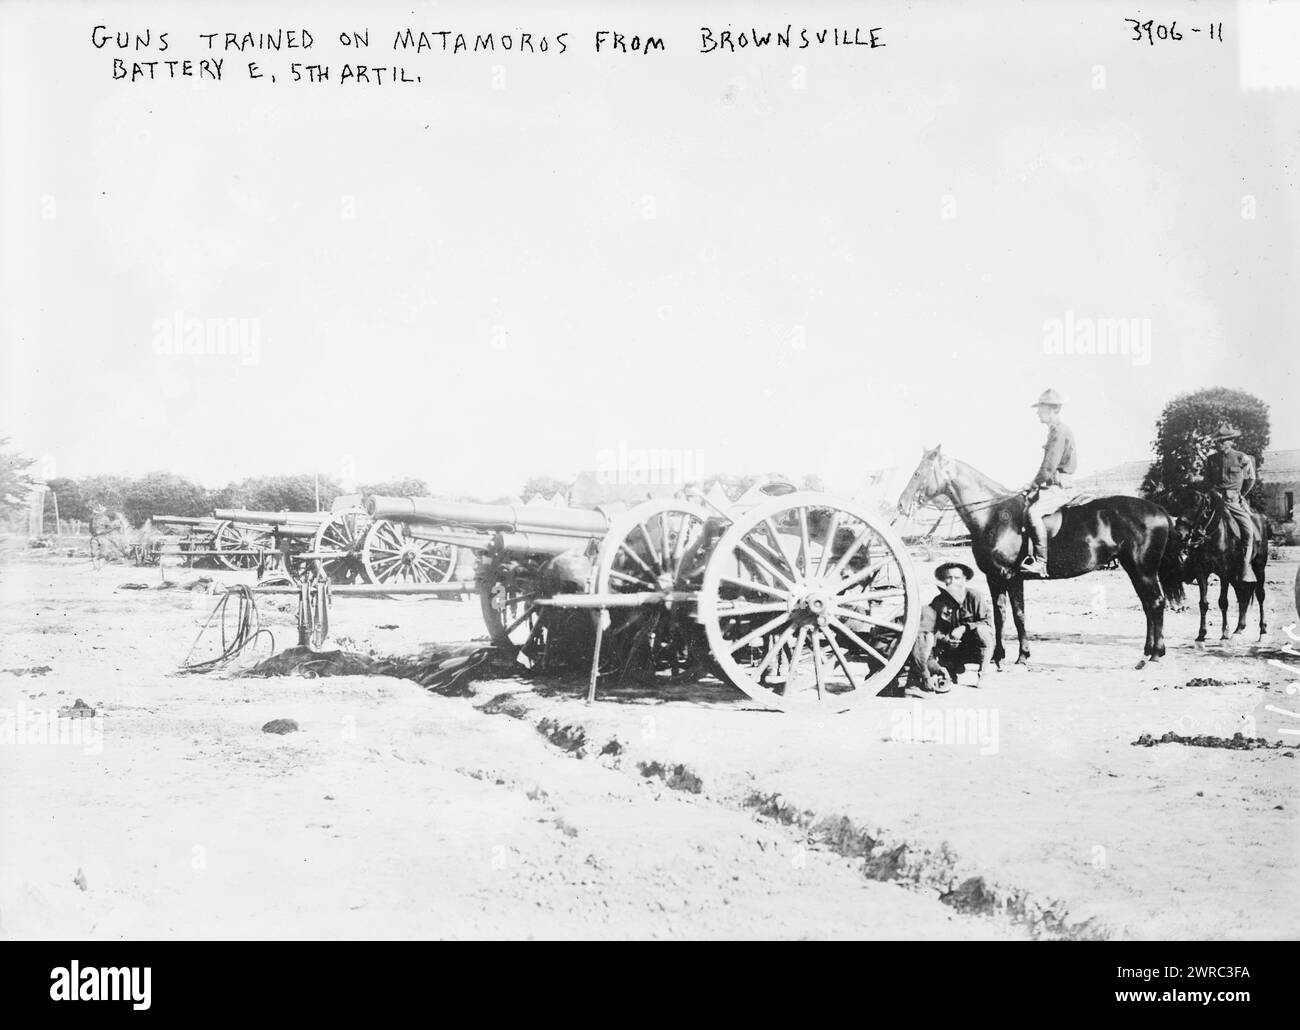 Guns trained on Matamoros from Brownsville Battery E. 5th Artil., Photograph shows Battery E of the 6th Field Artillery at Fort Brown, Texas, June 1916., 1916 June, Glass negatives, 1 negative: glass Stock Photo